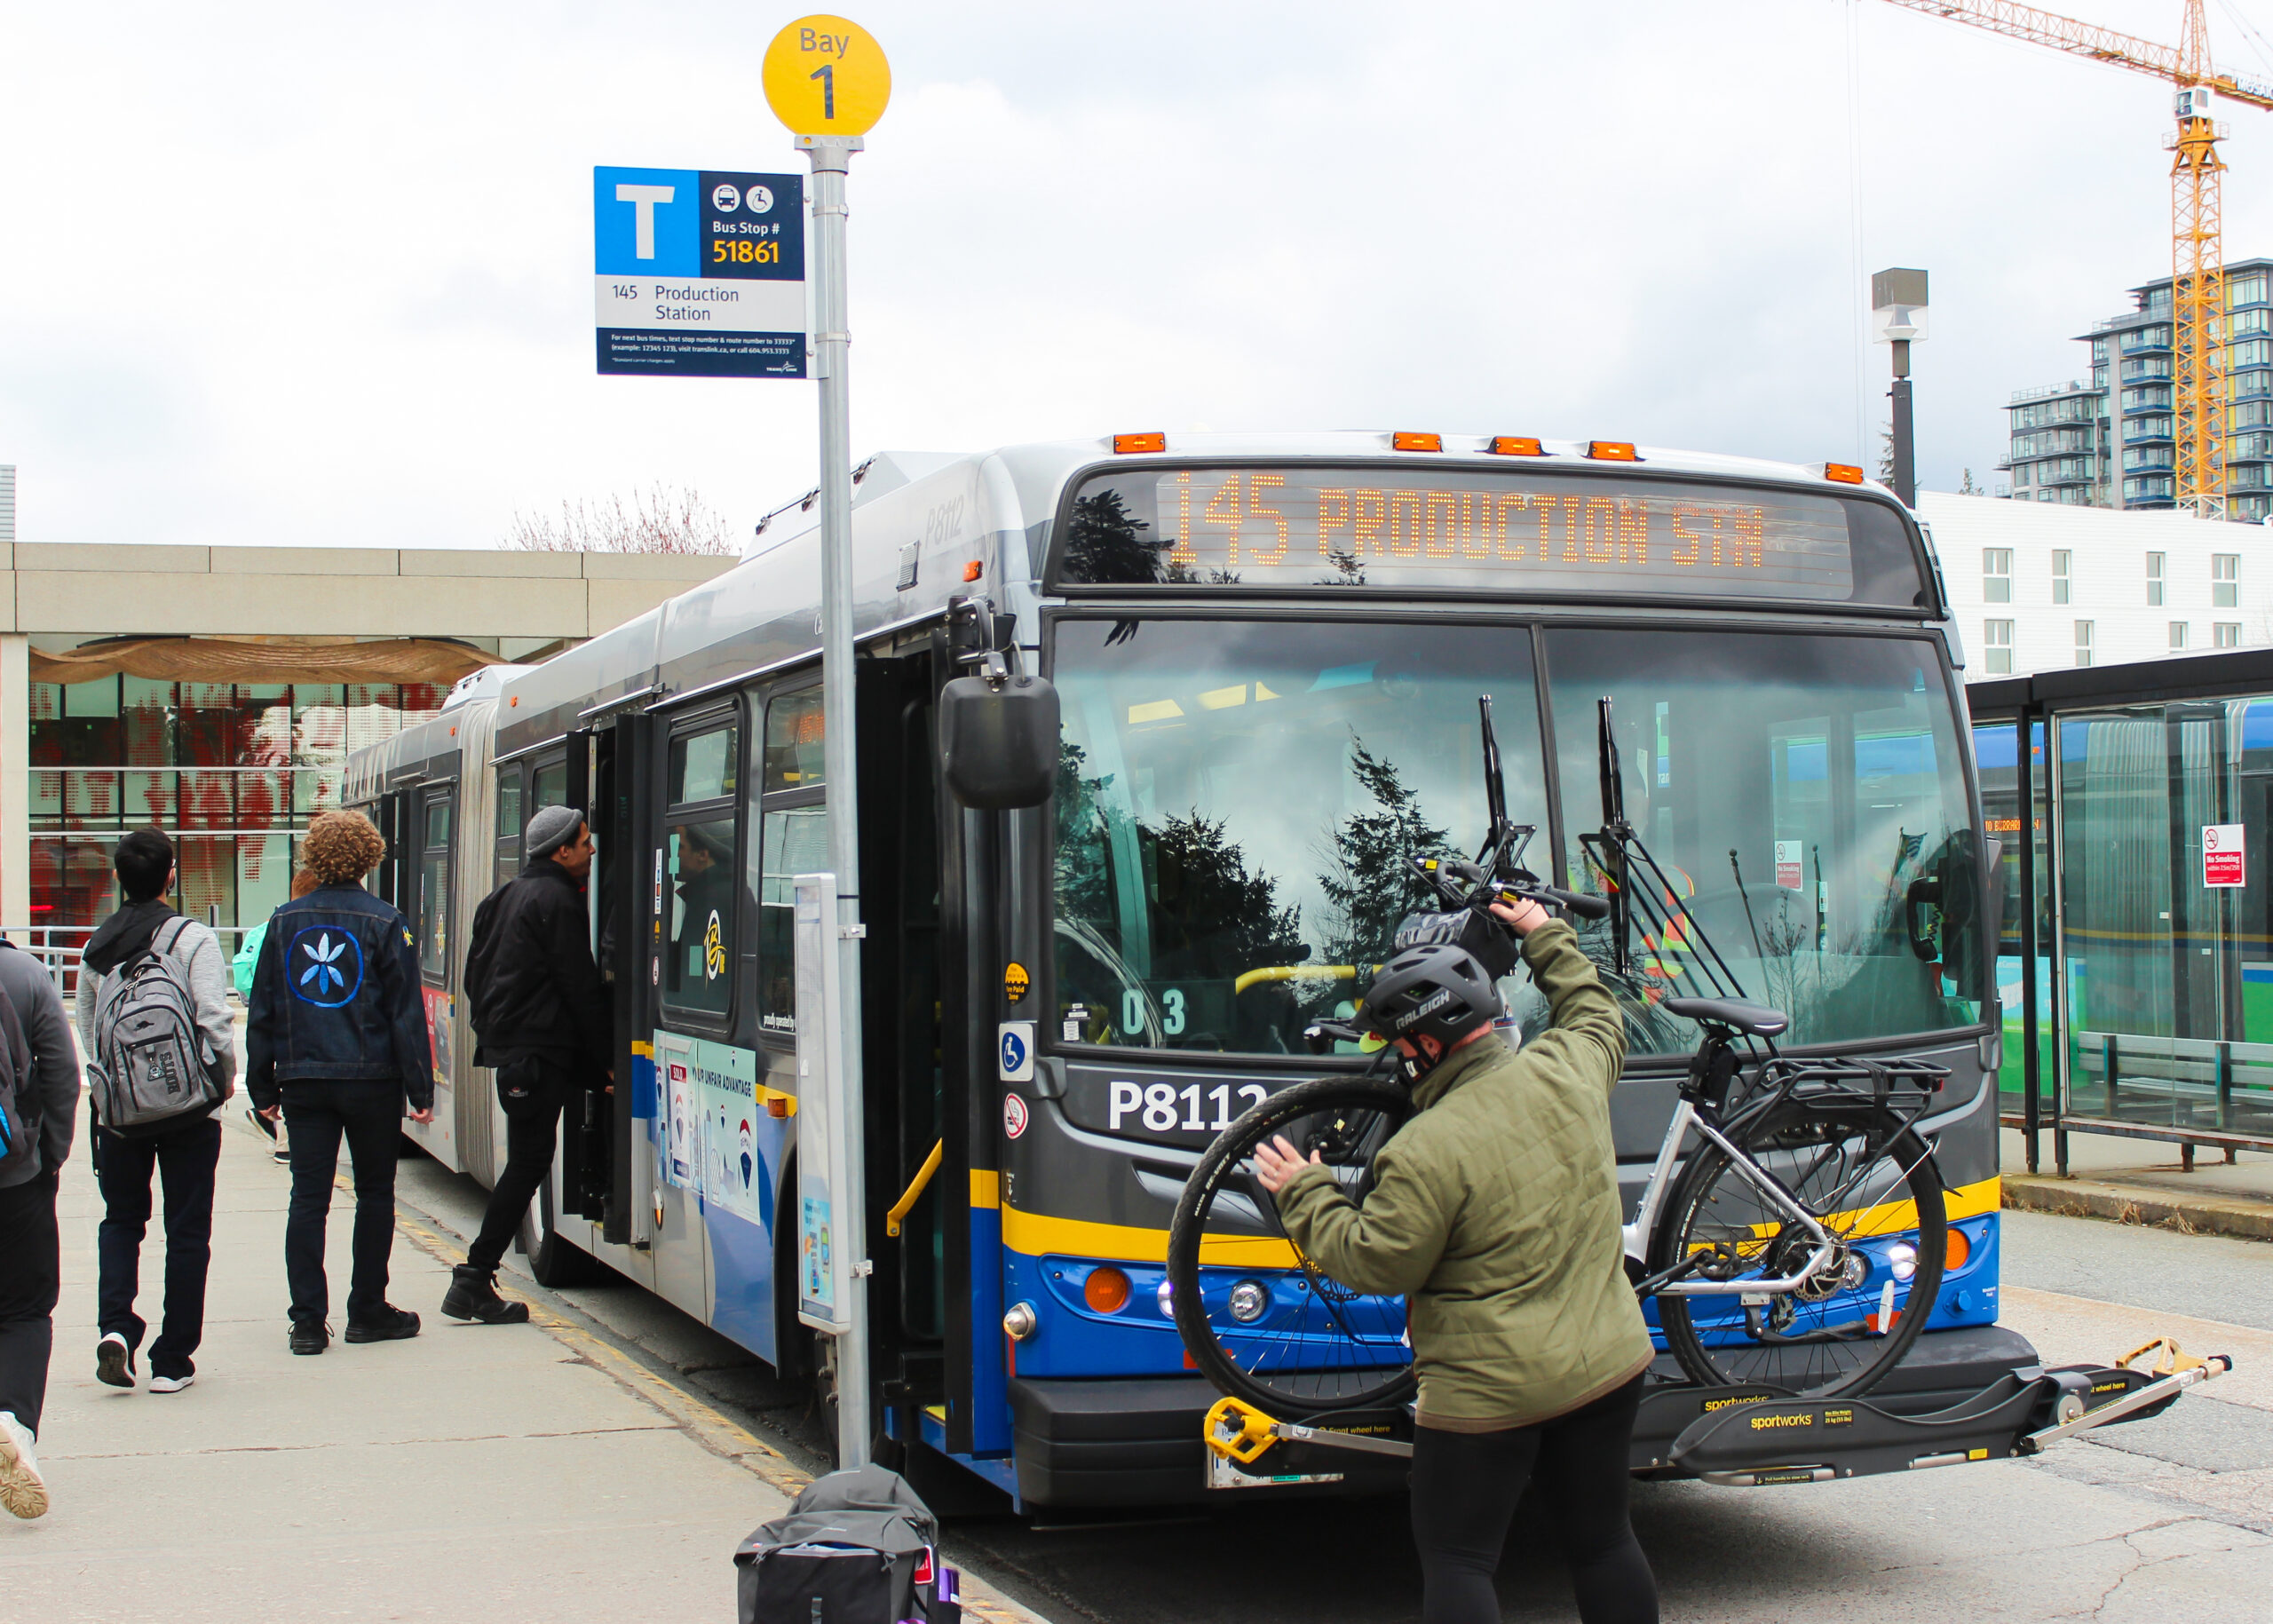 The photo shows the front of a BC TransLink bus. An individual is loading their bike to the front of the bus, as other passengers are boarding.